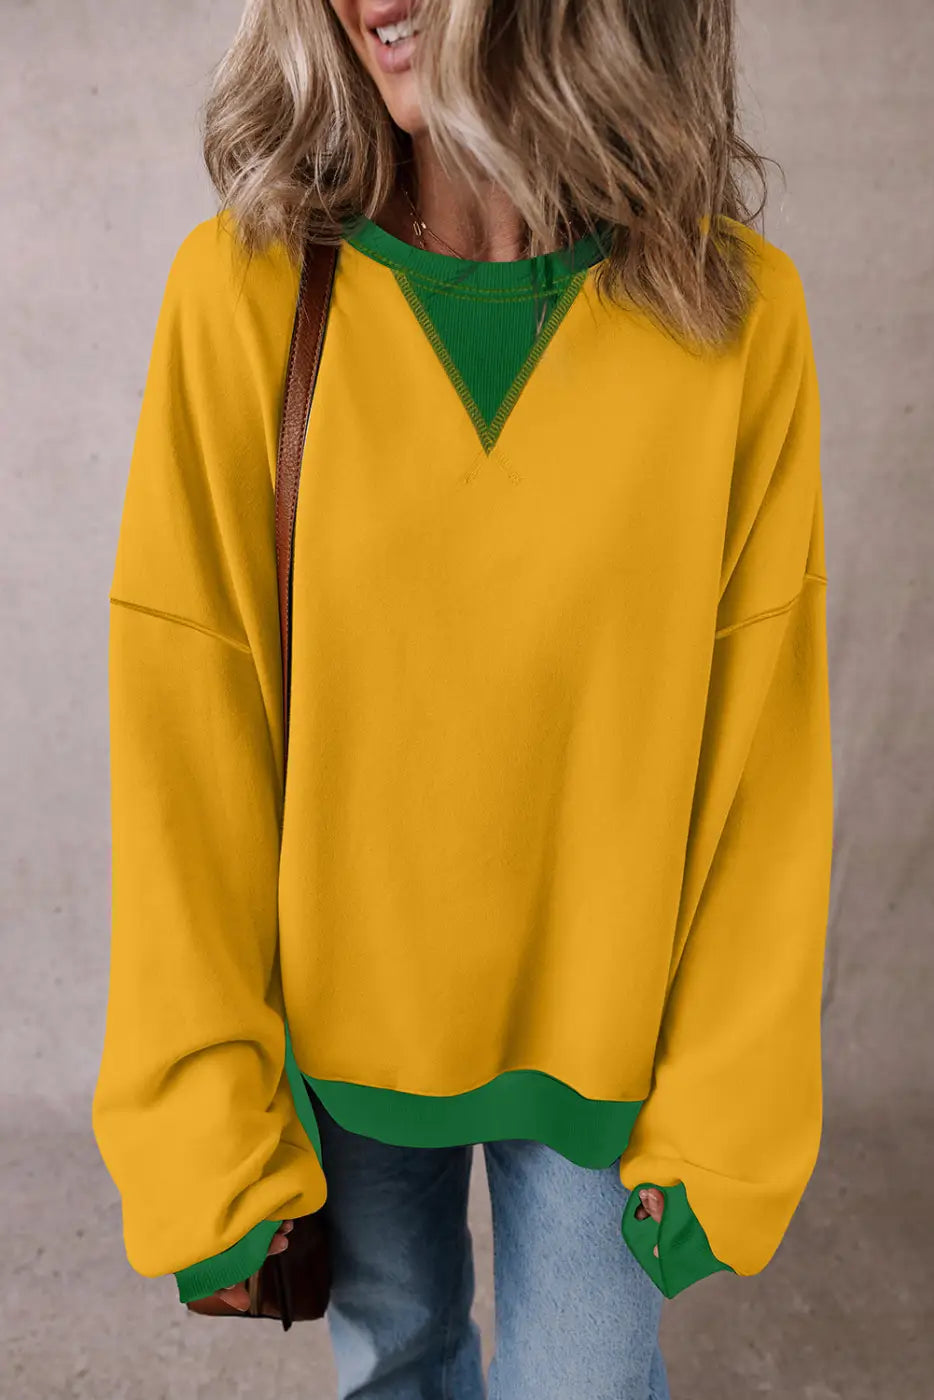 Bright yellow casual oversized sweatshirt with green accents at neckline and cuffs